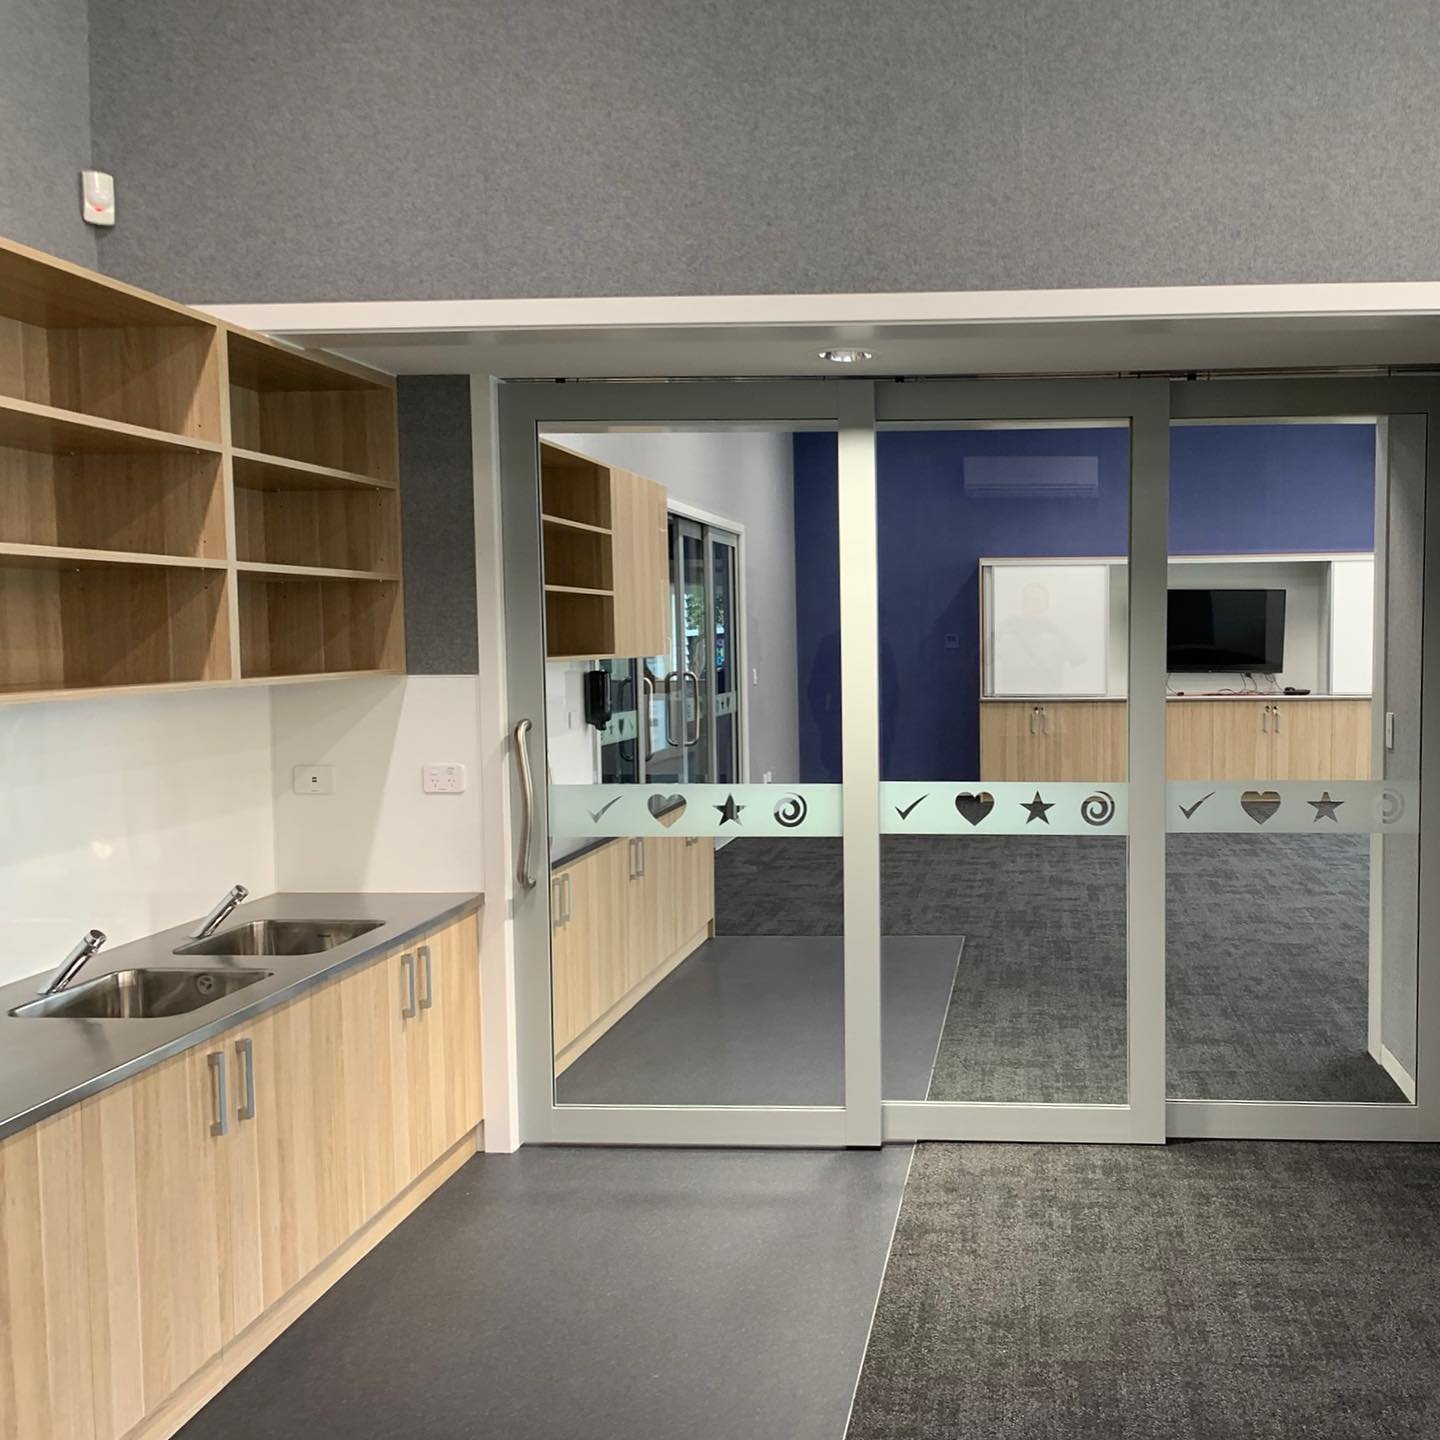 Whitney Street School Refurbishment, Blenheim, 2023 - We have recently completed the re-design of four existing classrooms providing flexibility and connectivity within the learning spaces. 

We have incorporated the school&rsquo;s logos and colours 